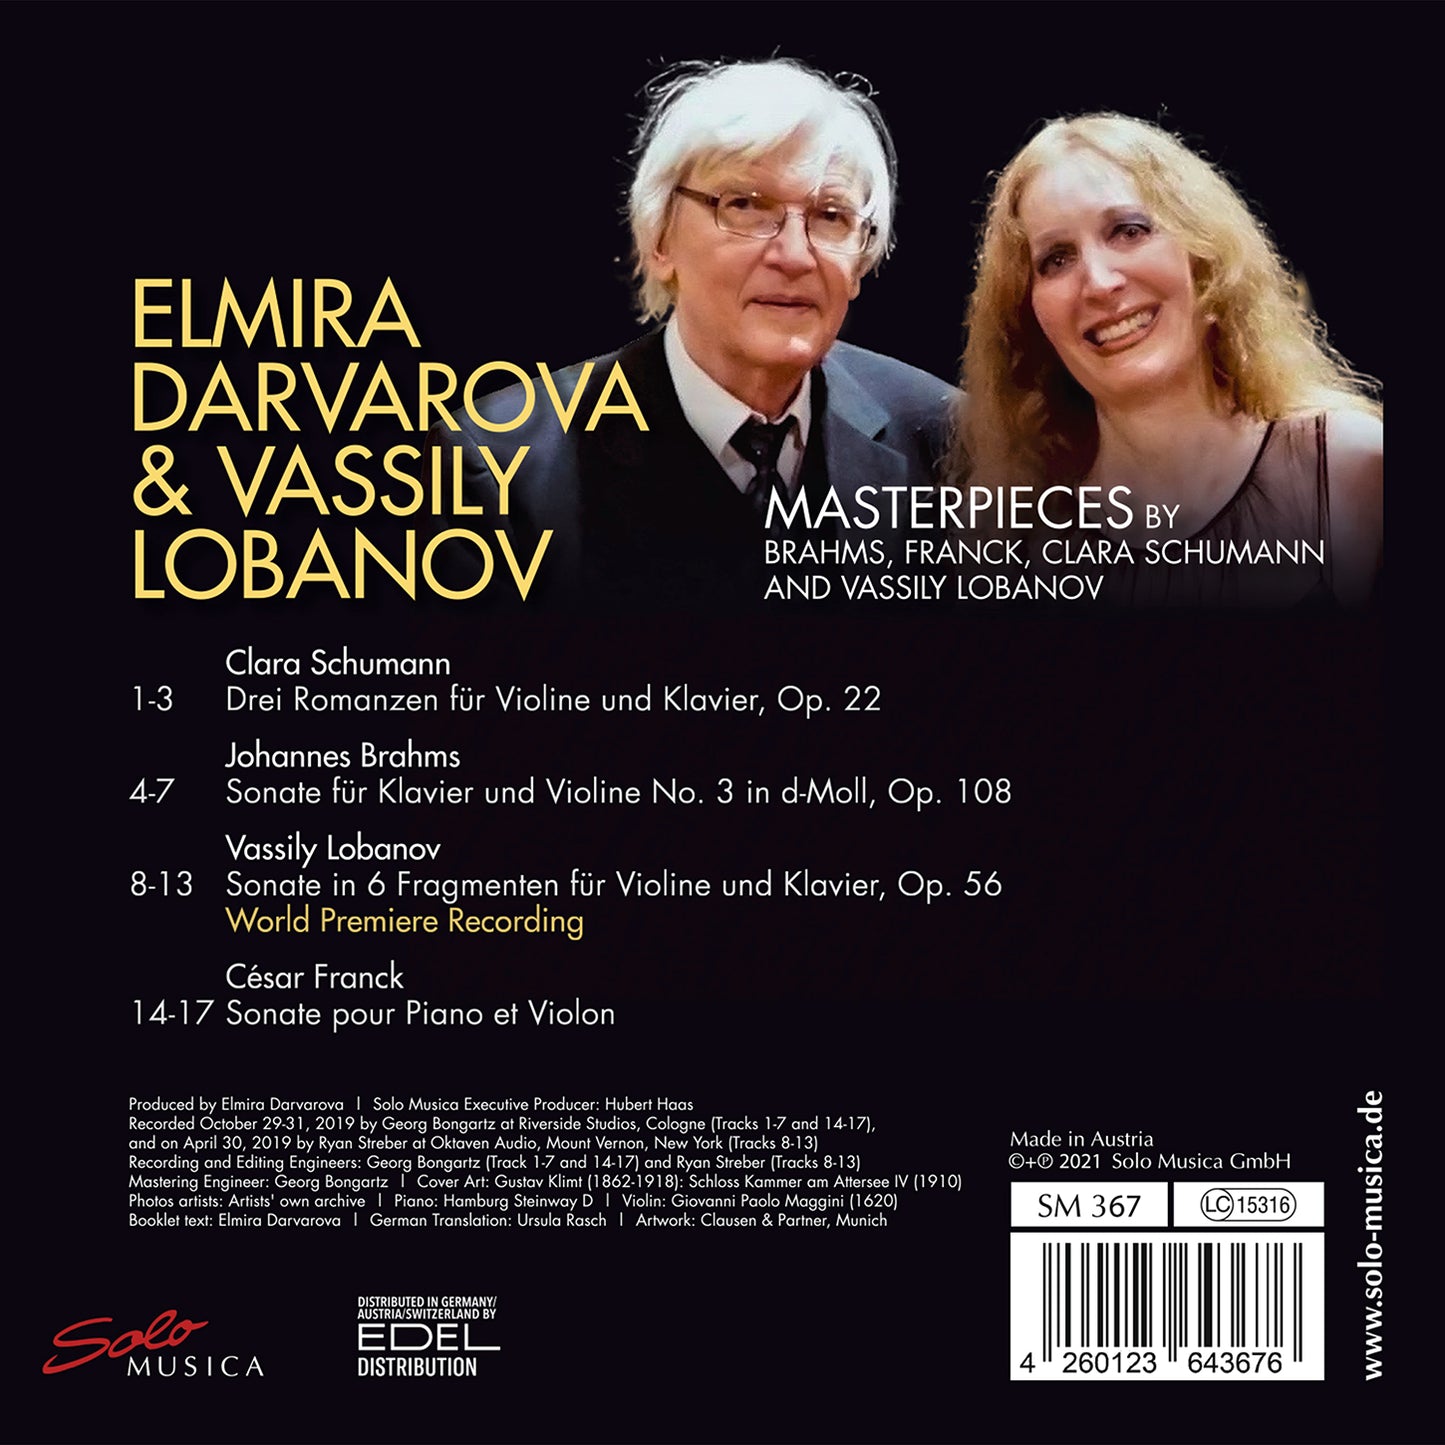 Masterpieces By Brahms, Franck, Clara Schumann And Vassily L